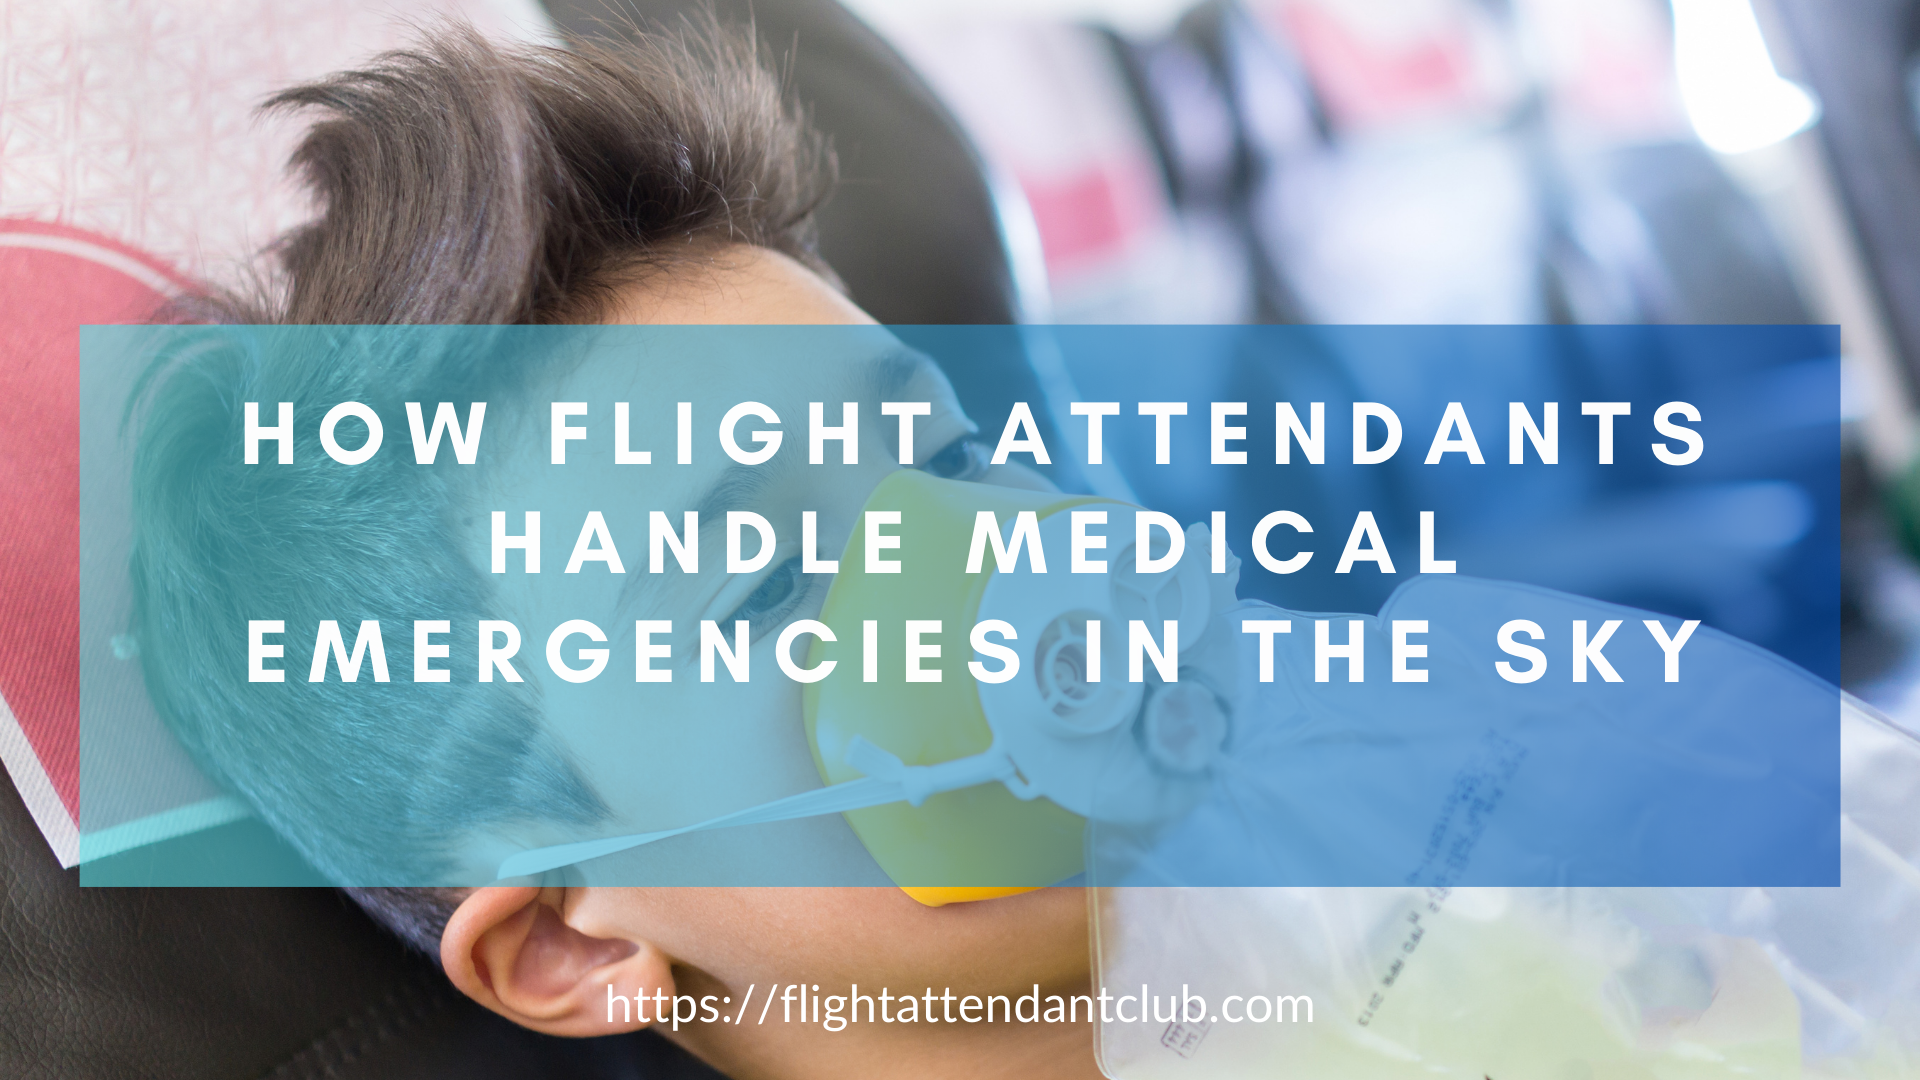 The featured image portrays a compassionate flight attendant attending to a passenger in need during a simulated medical emergency.